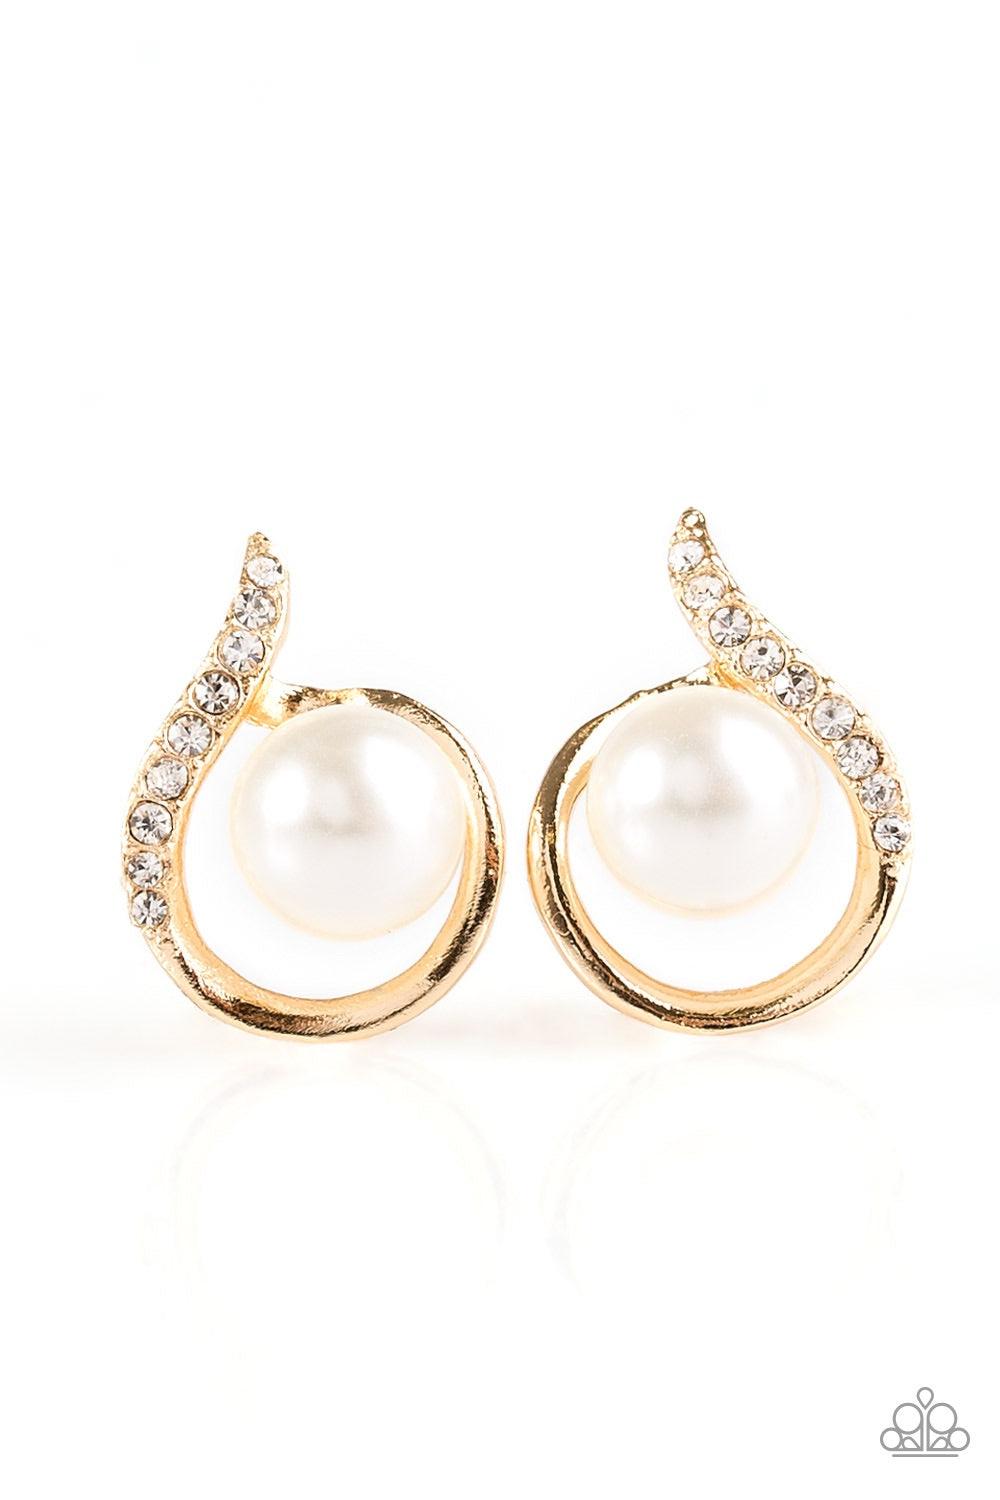 Paparazzi Accessories Ballroom Beauty - Gold Encrusted in a section of glassy white rhinestones, a shimmery ribbon of gold circles around a pearly white bead for a refined look. Earring attaches to a standard post fitting. Jewelry